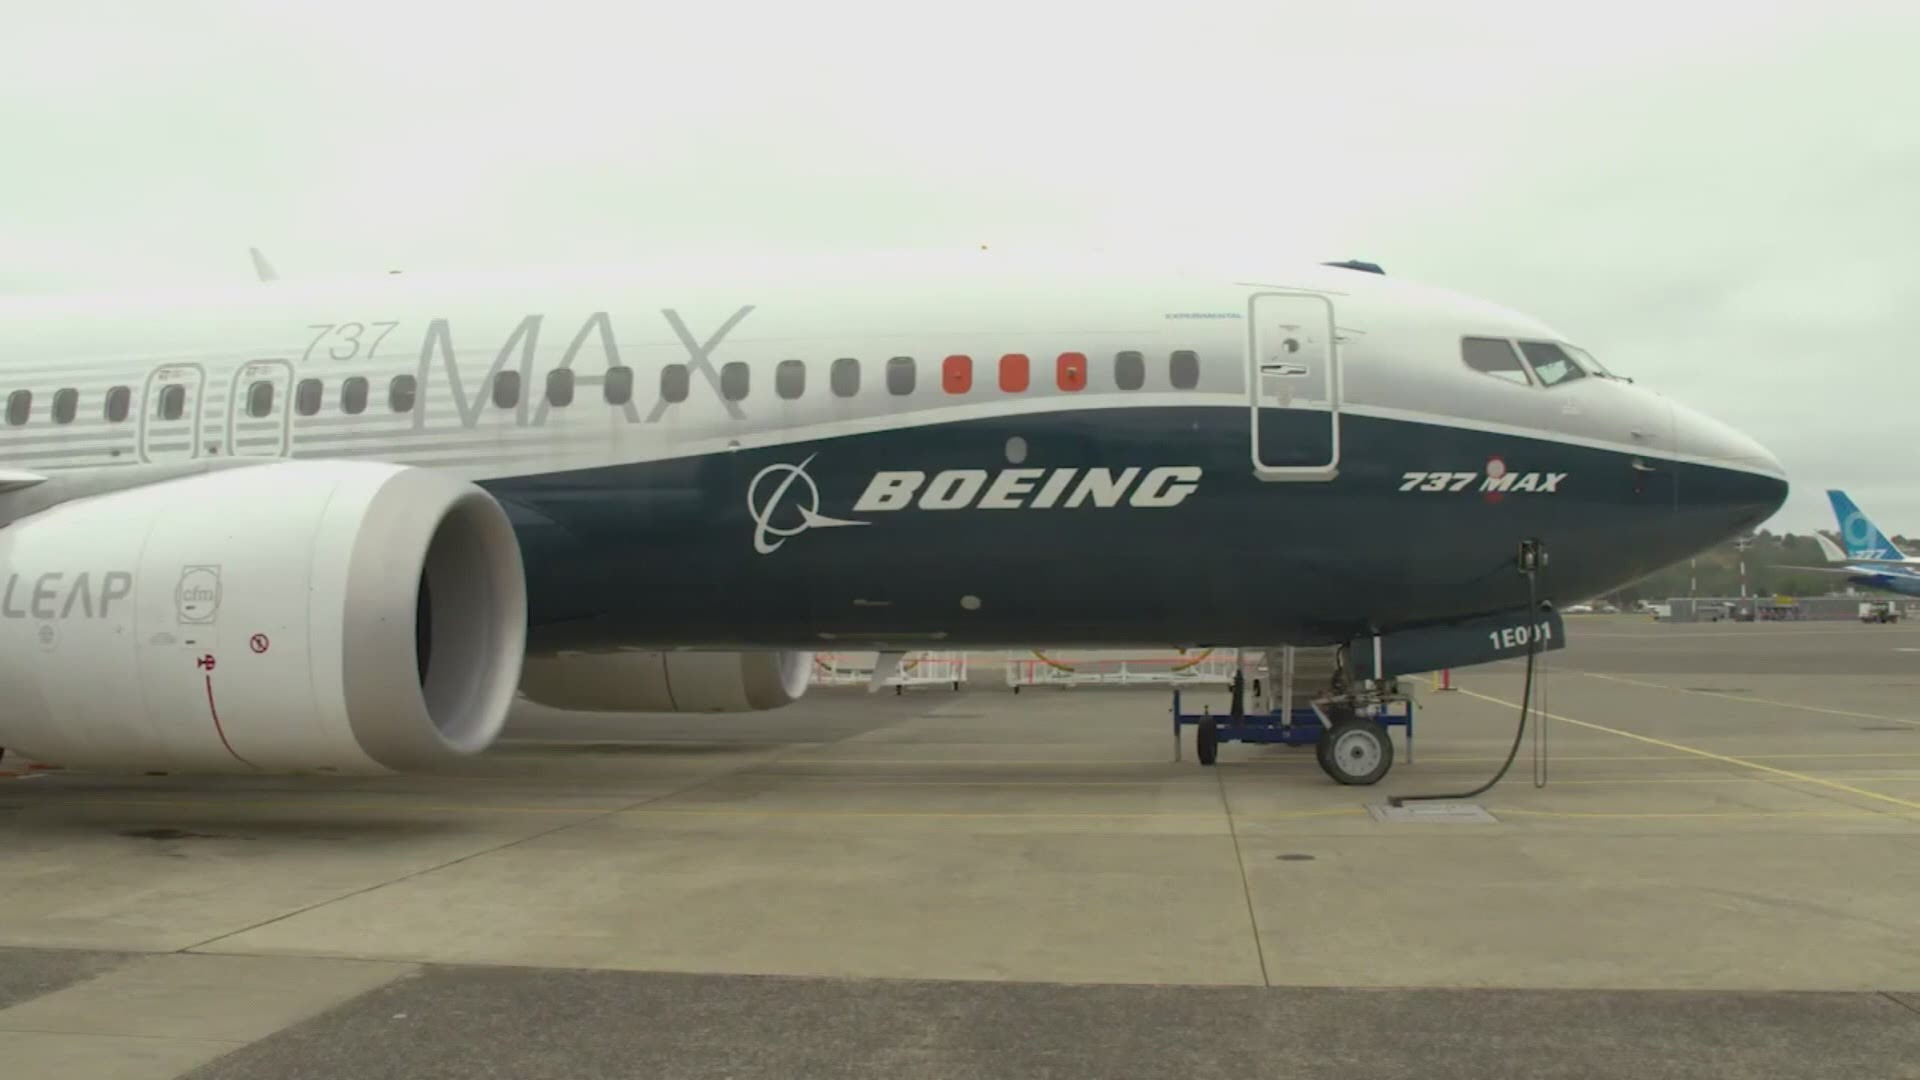 Boeing also announced the retirement of CFO Greg Smith in July. Also another order for the 737 MAX jet.